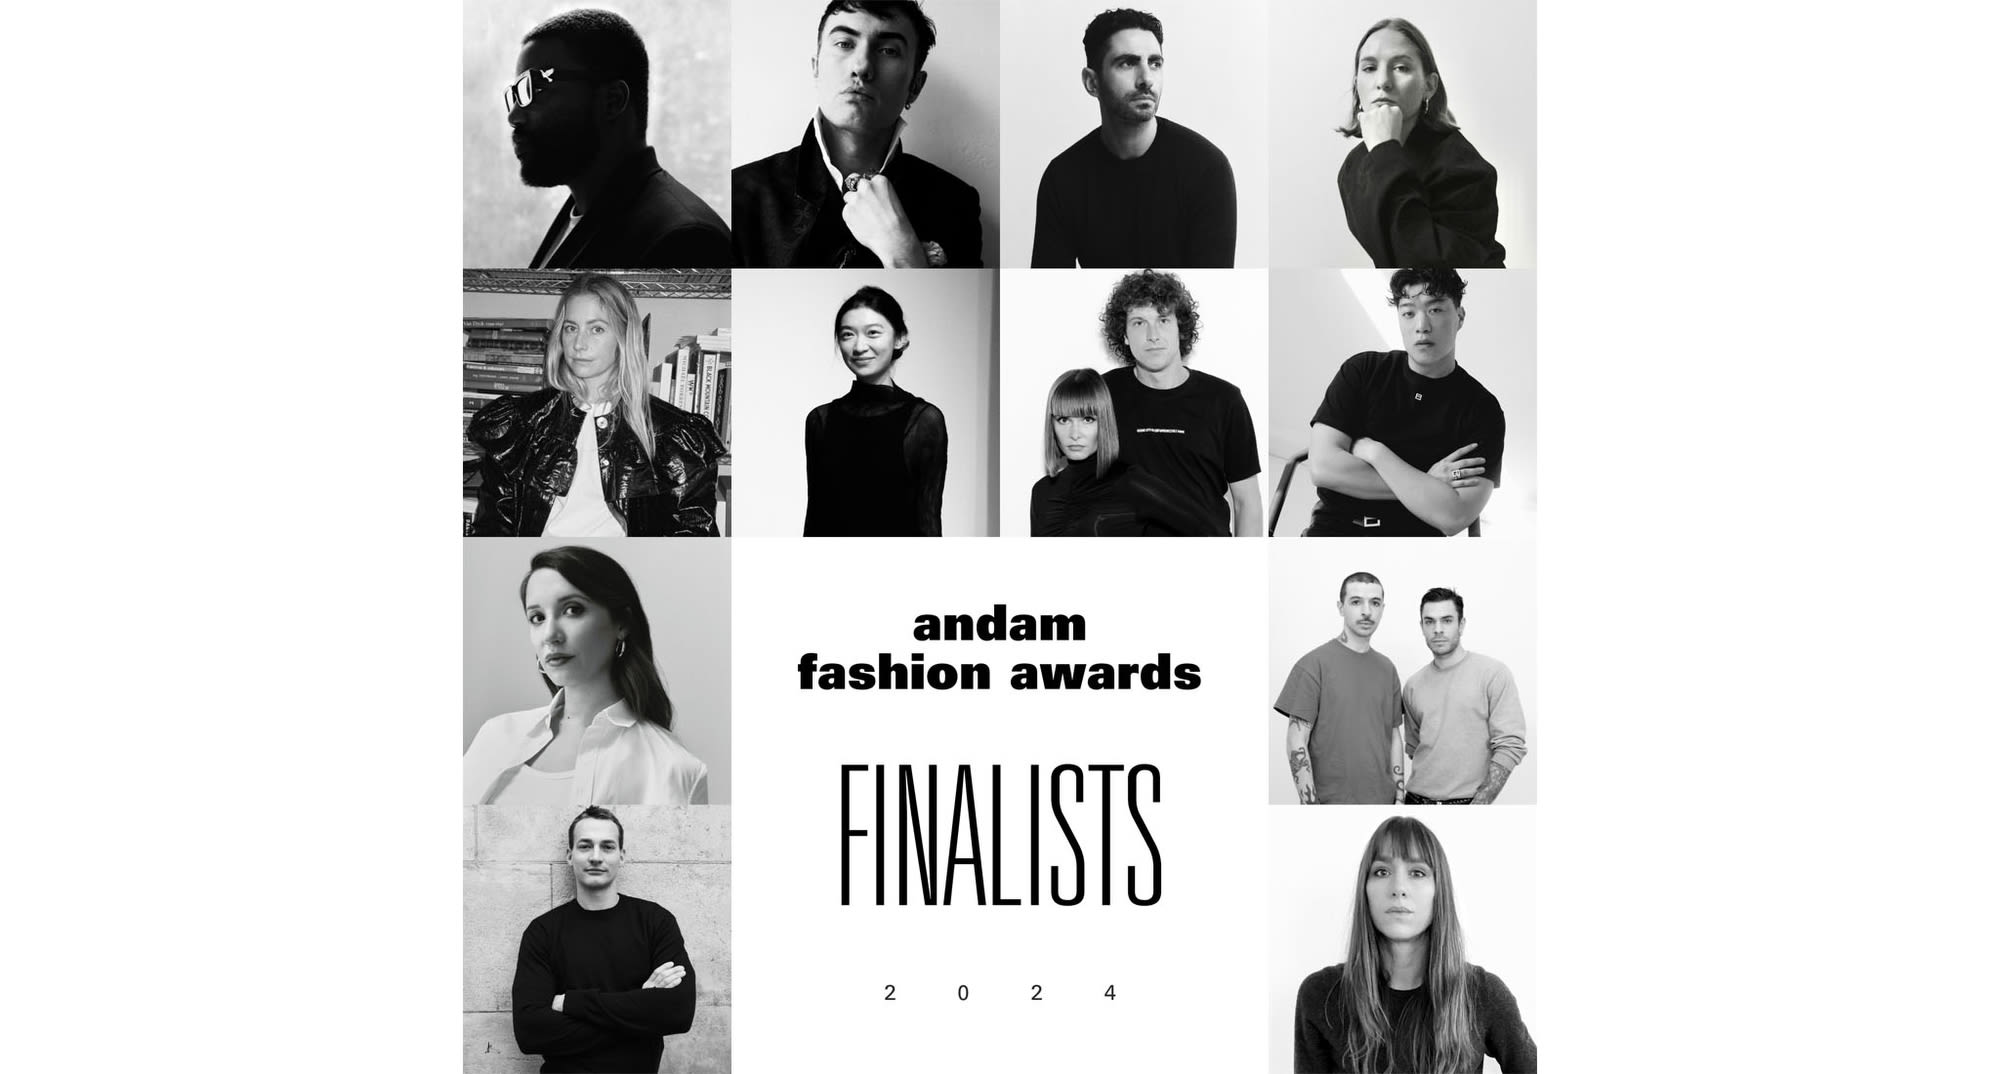 EXCLUSIVE: Christopher Esber, 3.Paradis and Meryll Rogge Among Finalists for ANDAM Fashion Awards